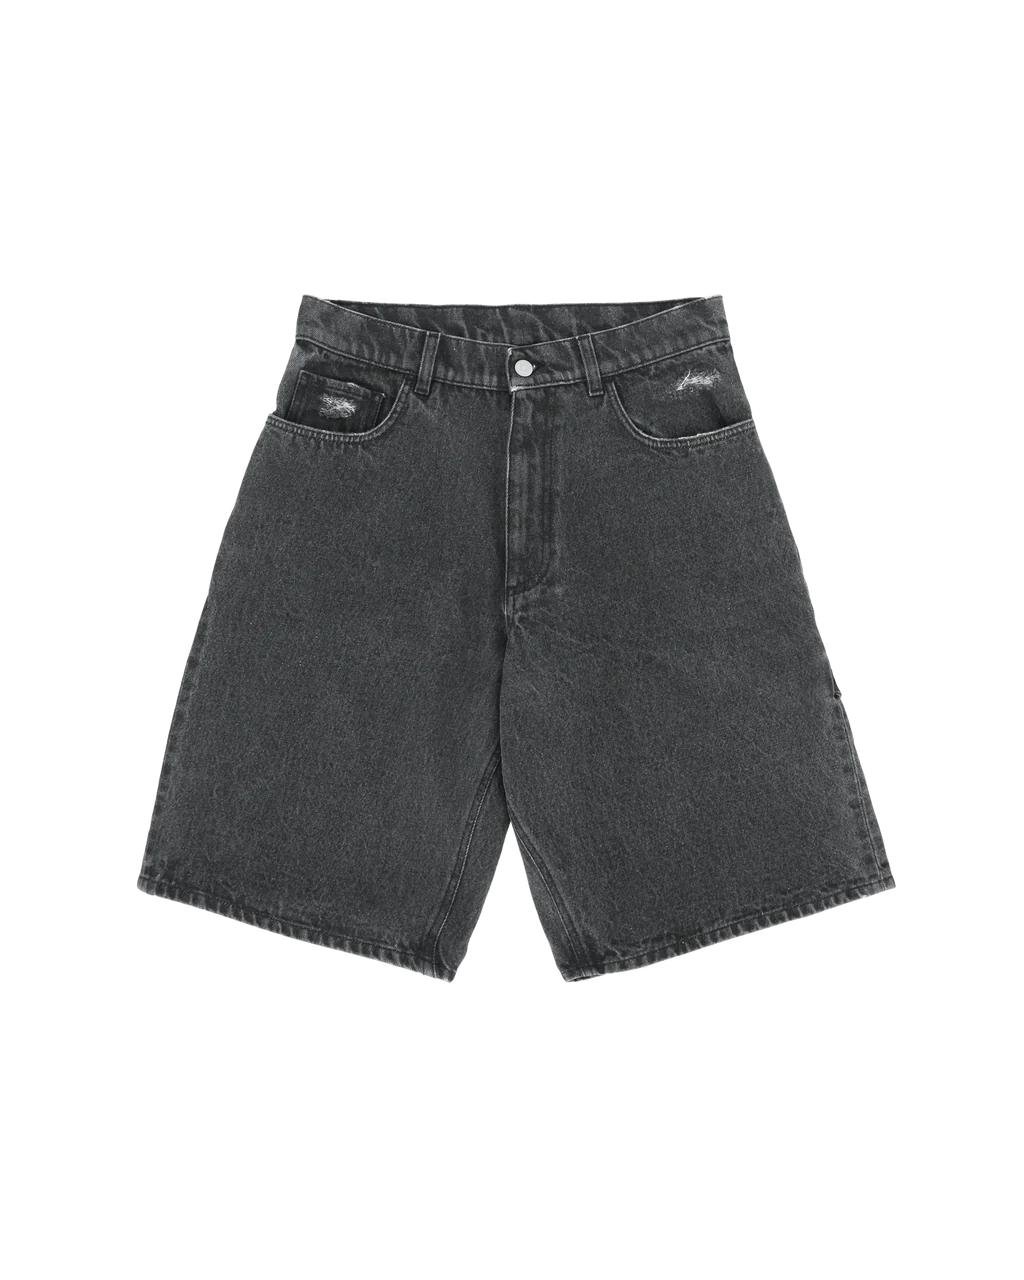 1017 ALYX - Distressed Carpenter Shorts With Buckle - (BLK0003 Washed Black) by ALYX